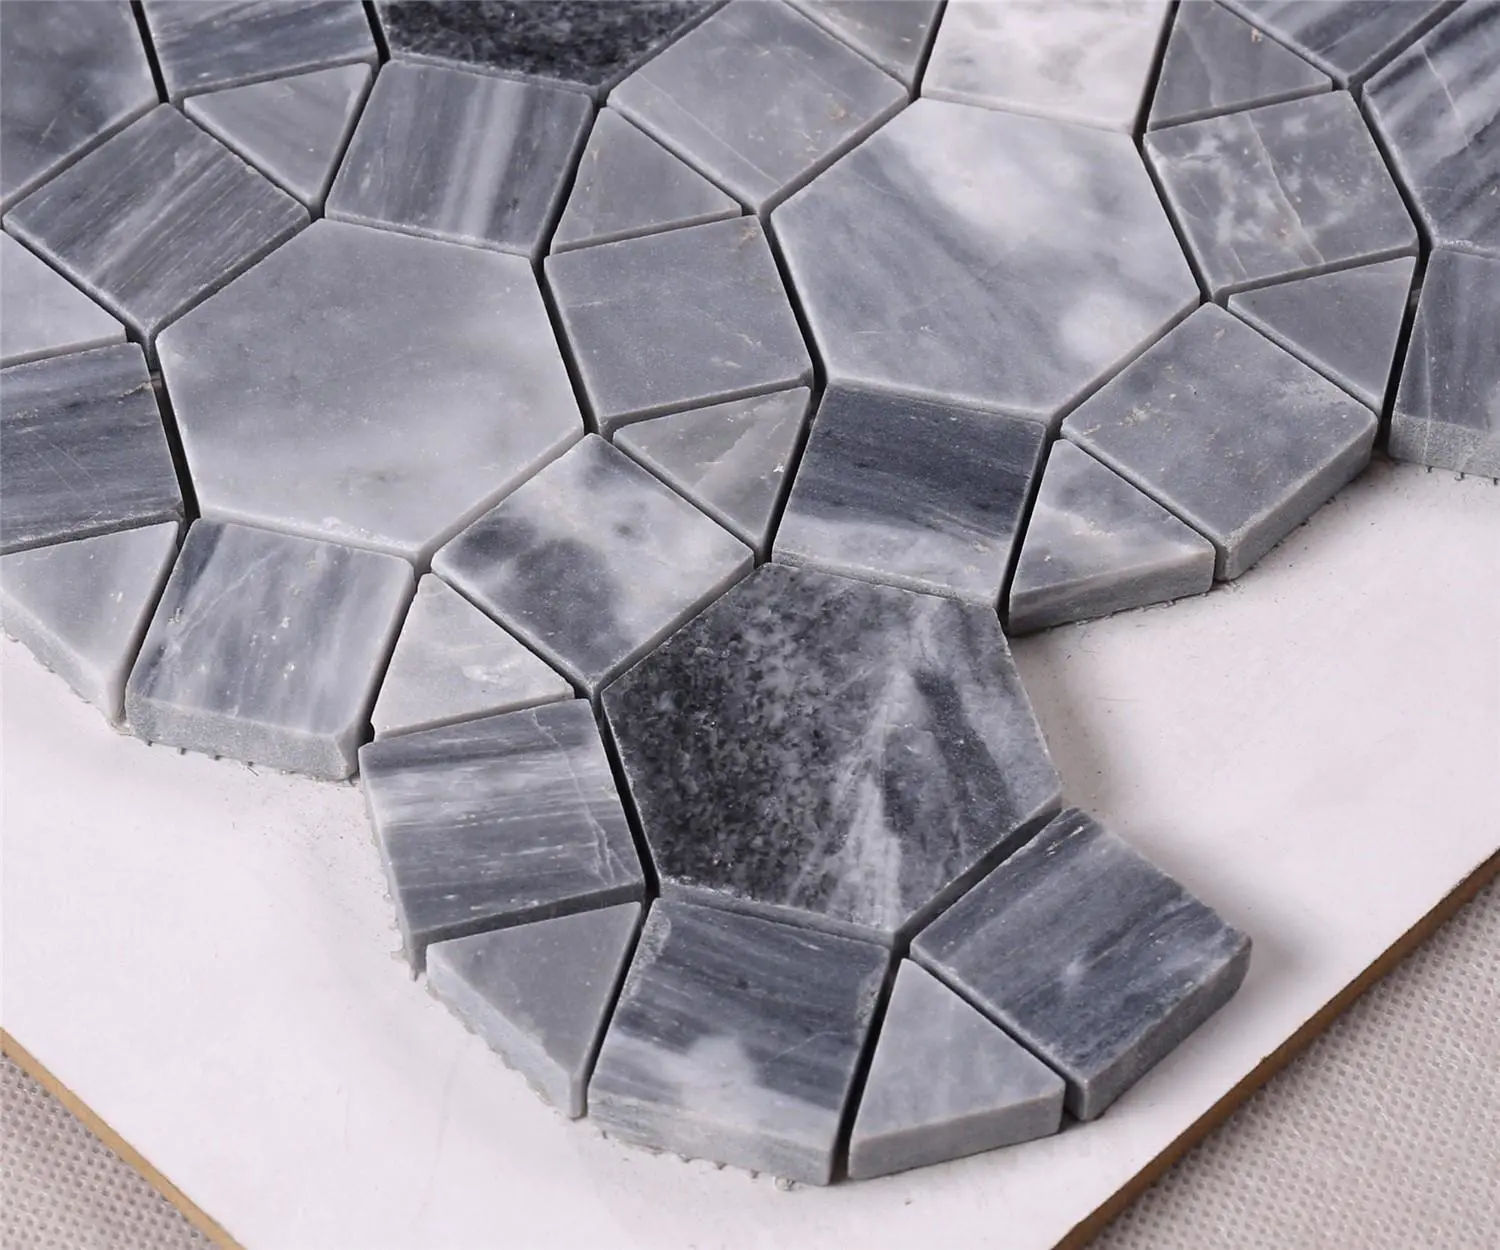 3x3 square mosaic tiles mosaic inquire now for kitchen